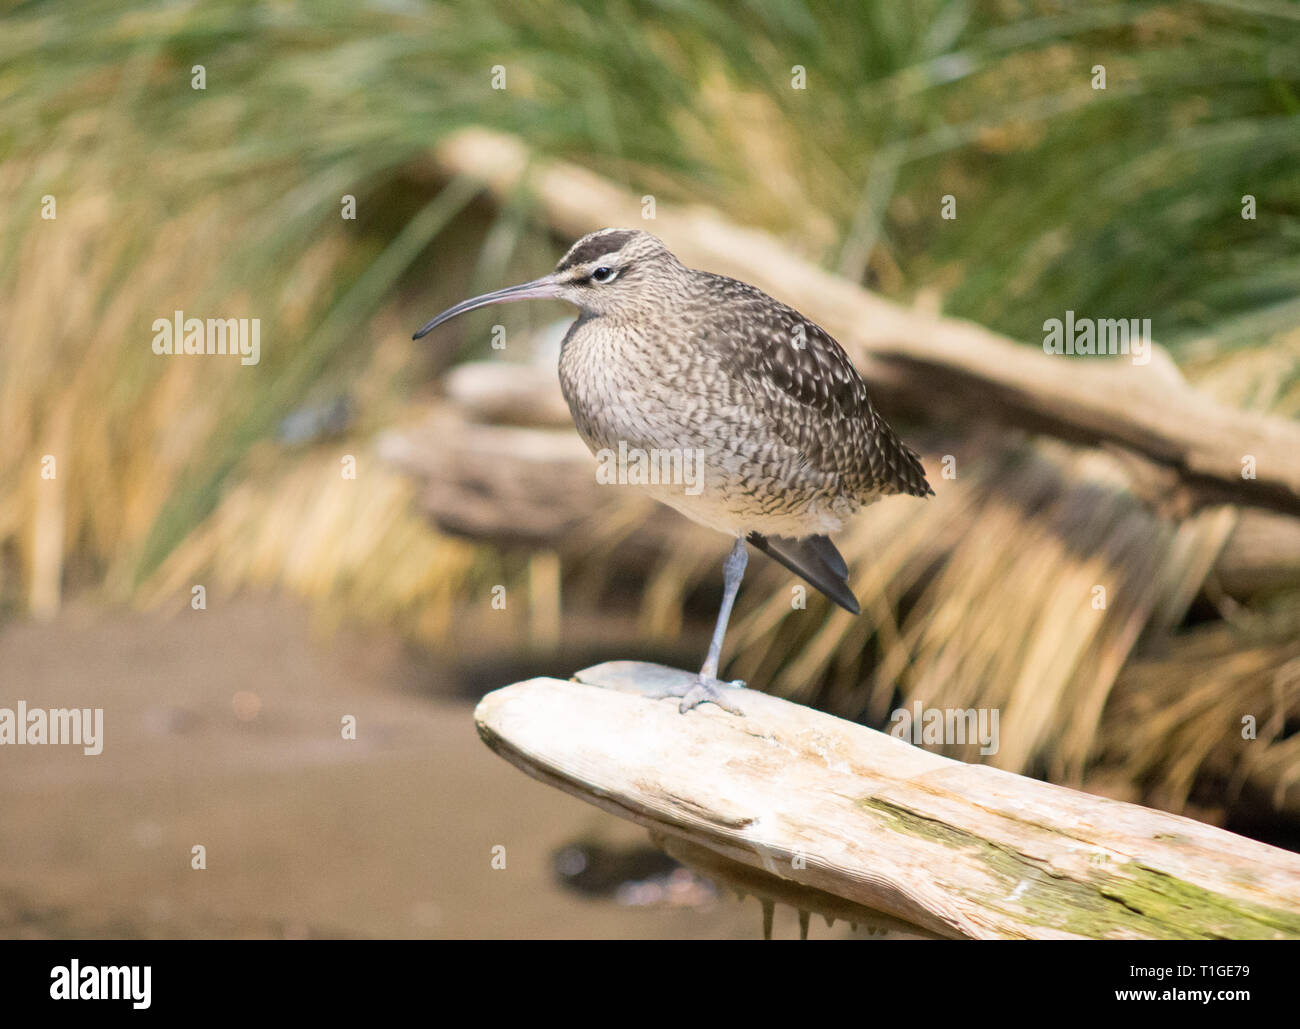 A whimbrel (Numenius phaeopus), a North American shorebird, perched on a piece of driftwood along the shore. Stock Photo